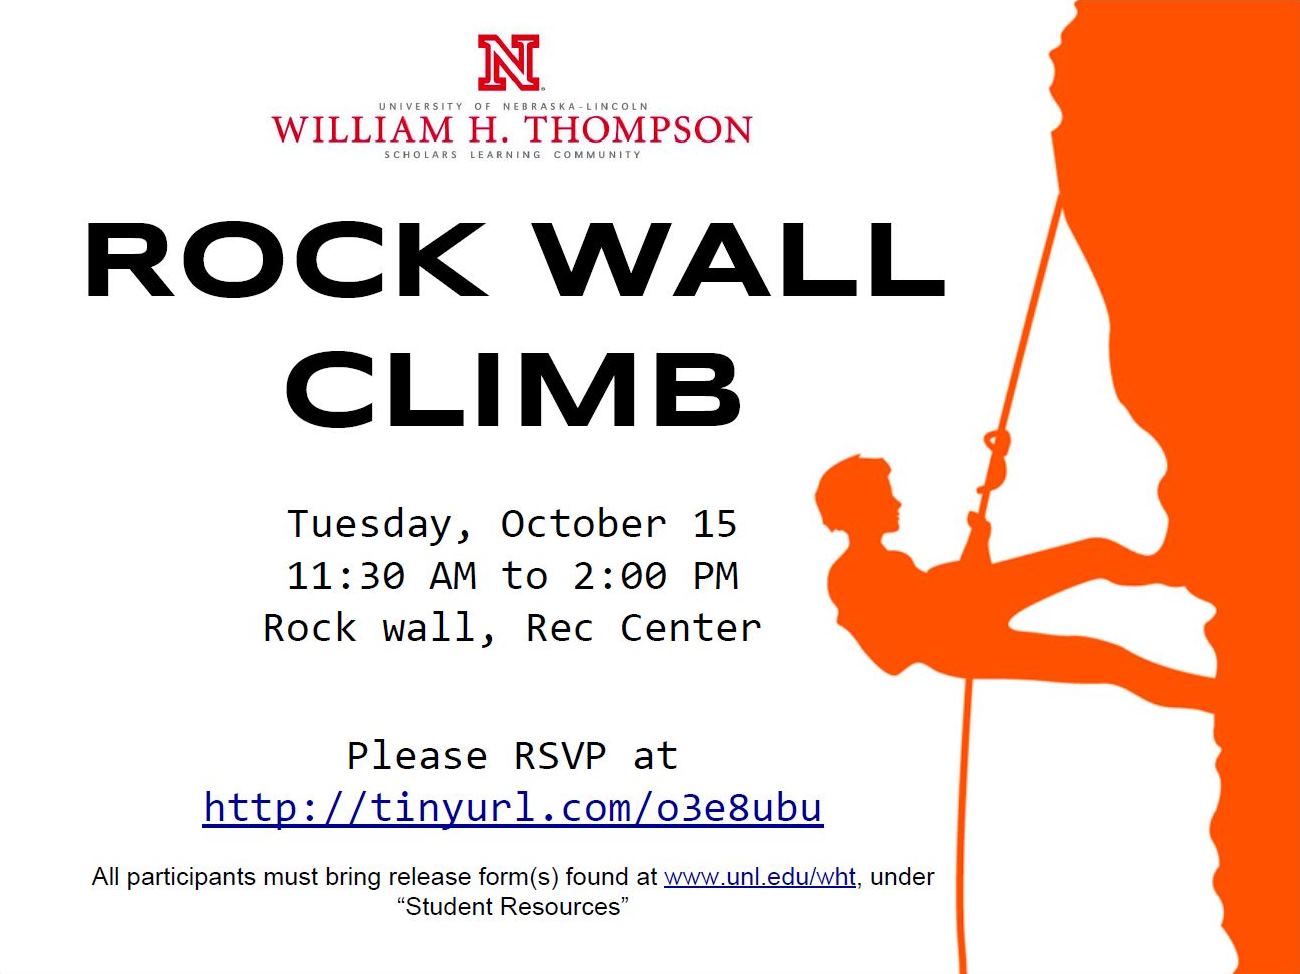 Rock Wall Climb, Tuesday, October 15, 11:30 a.m. to 2:00 p.m. at the Rec Center